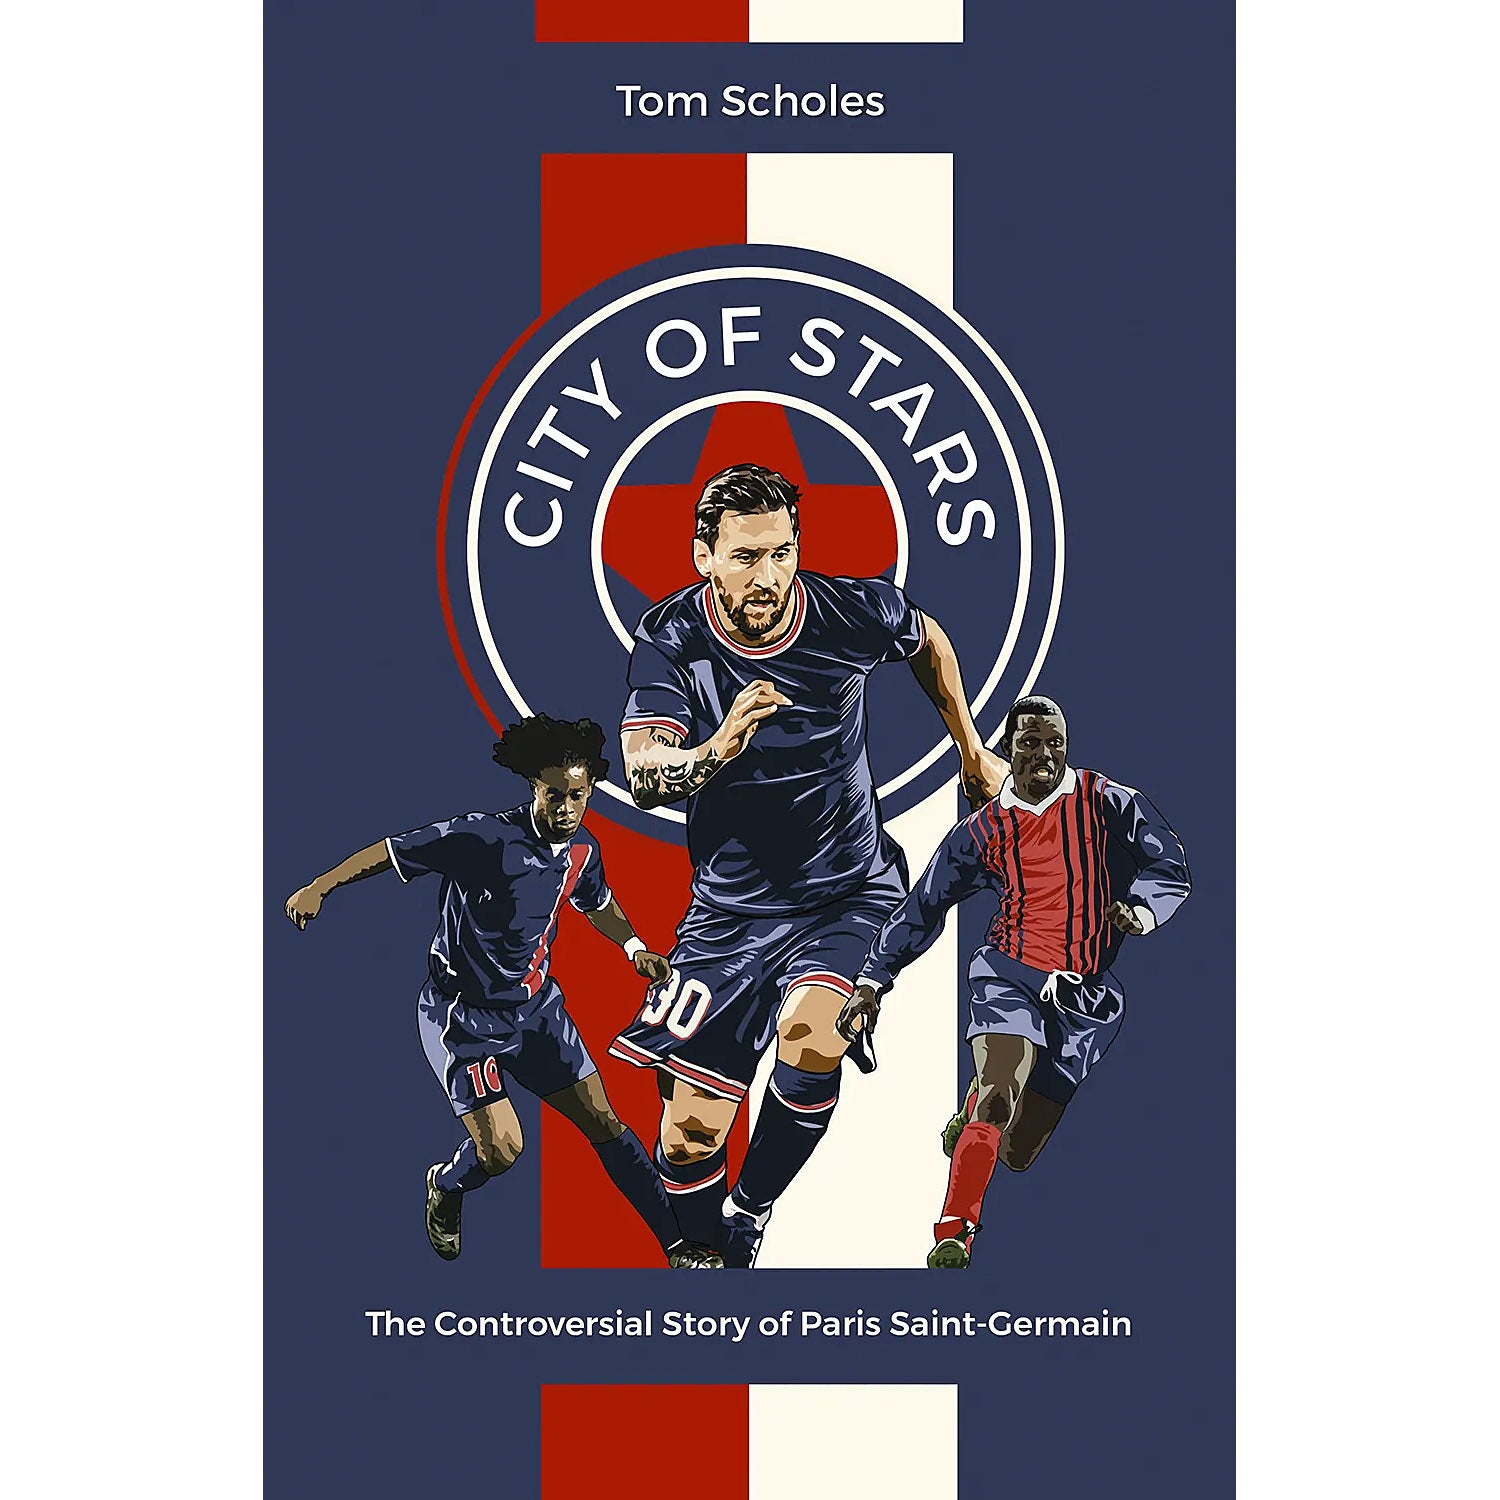 City of Stars – The Controversial Story of Paris Saint-Germain